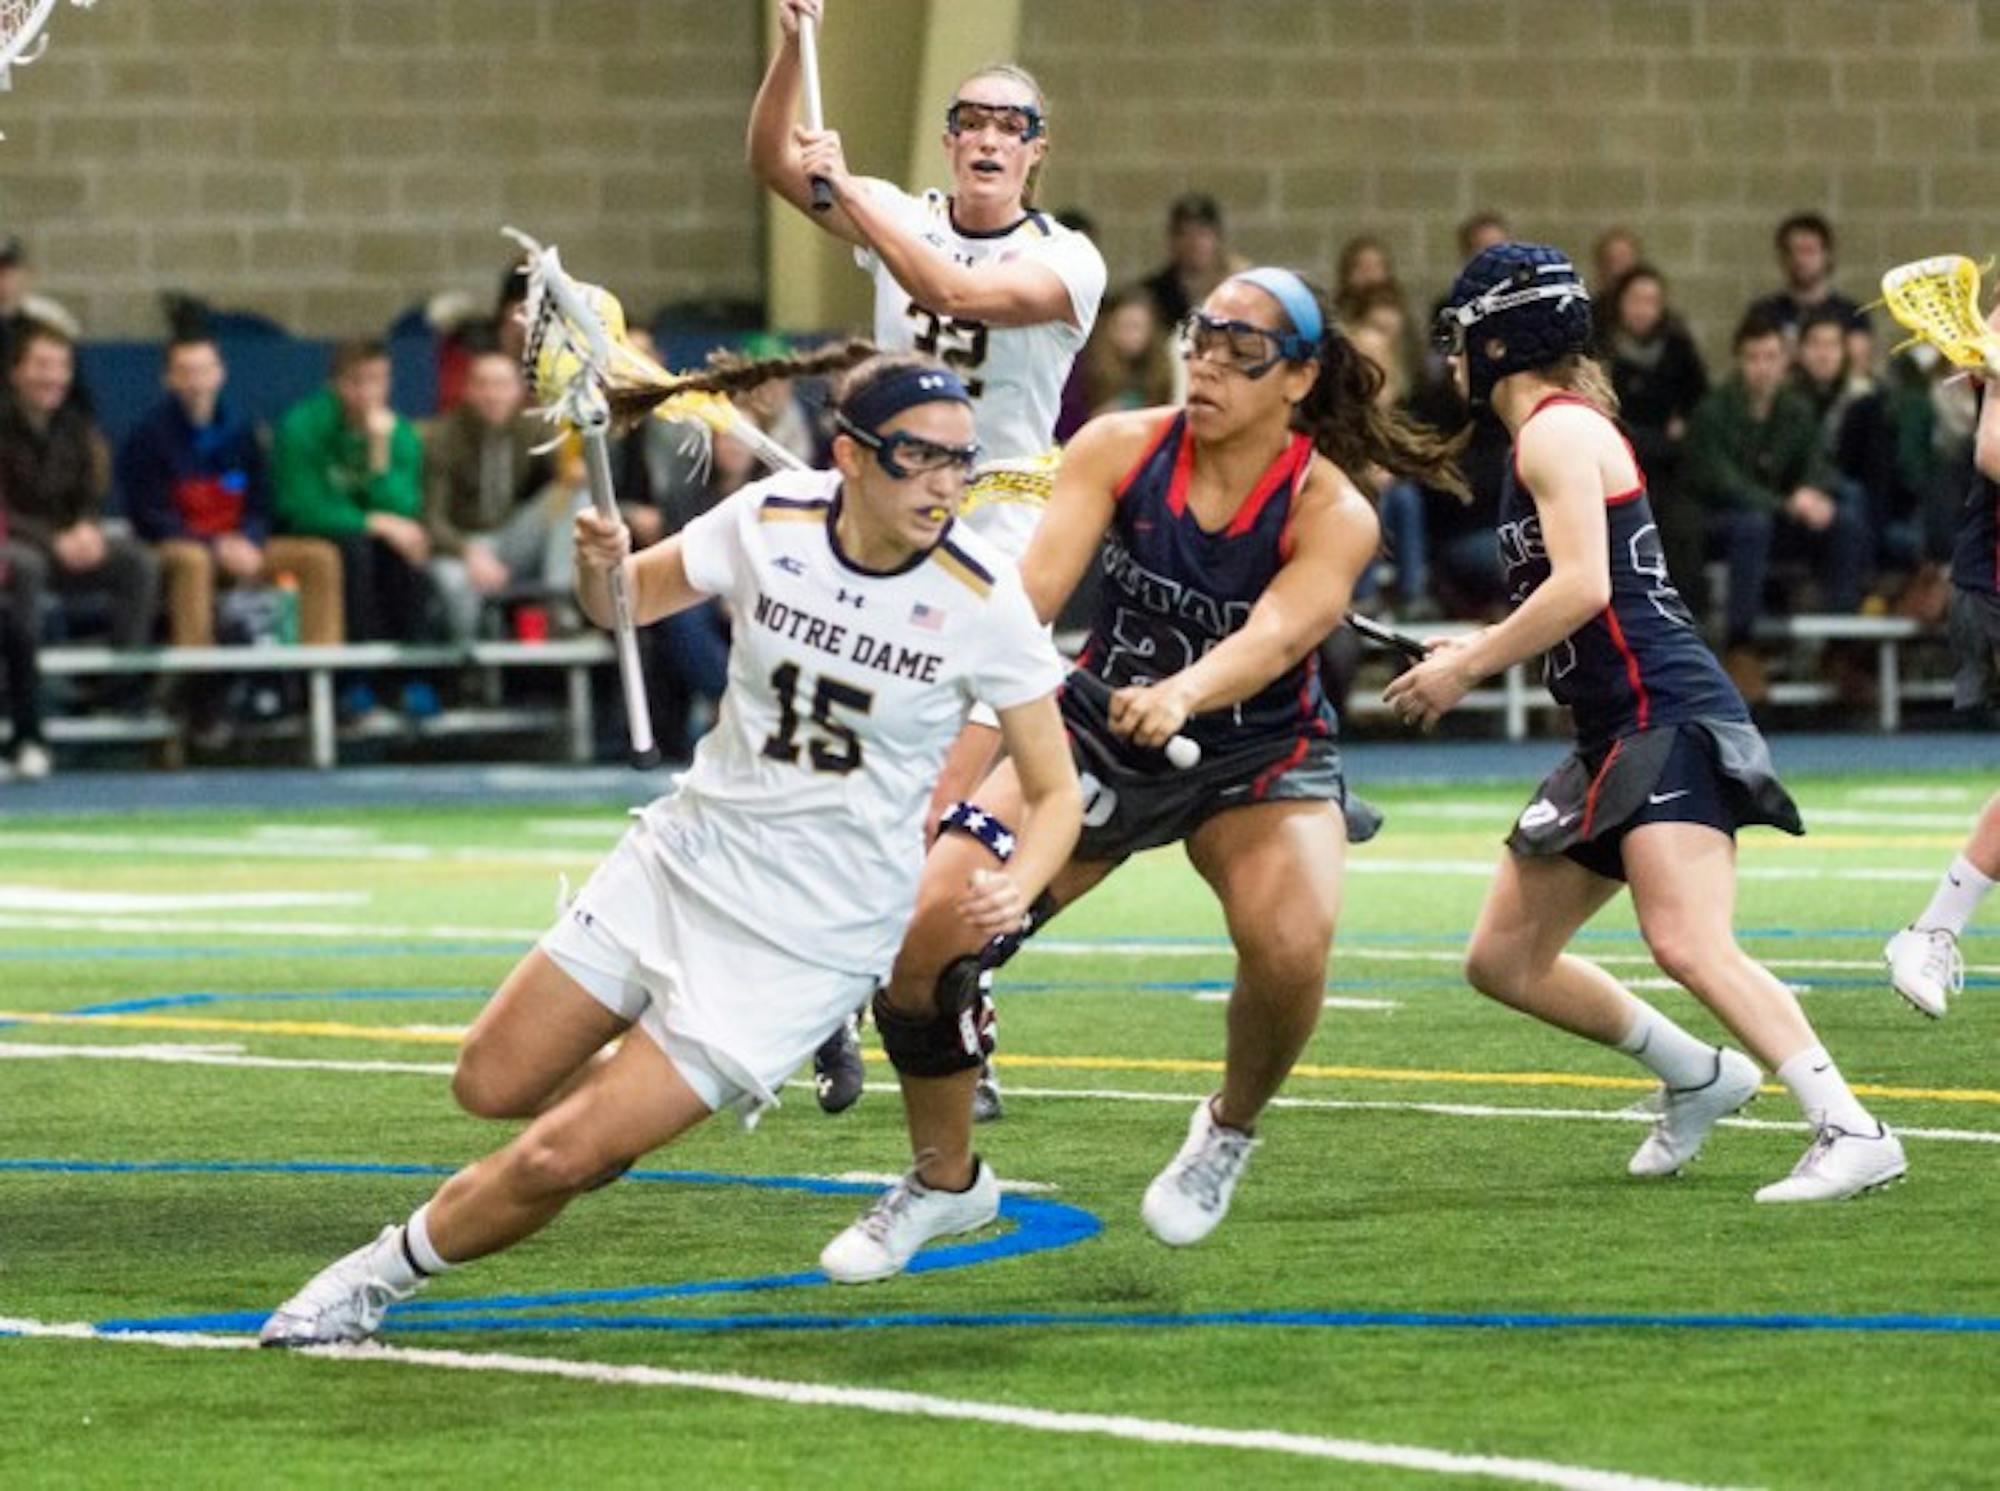 Irish sophomore attack Cortney Fortunato spins away from a  defender during Notre Dame’s 17-5 win over Detroit on Sunday.